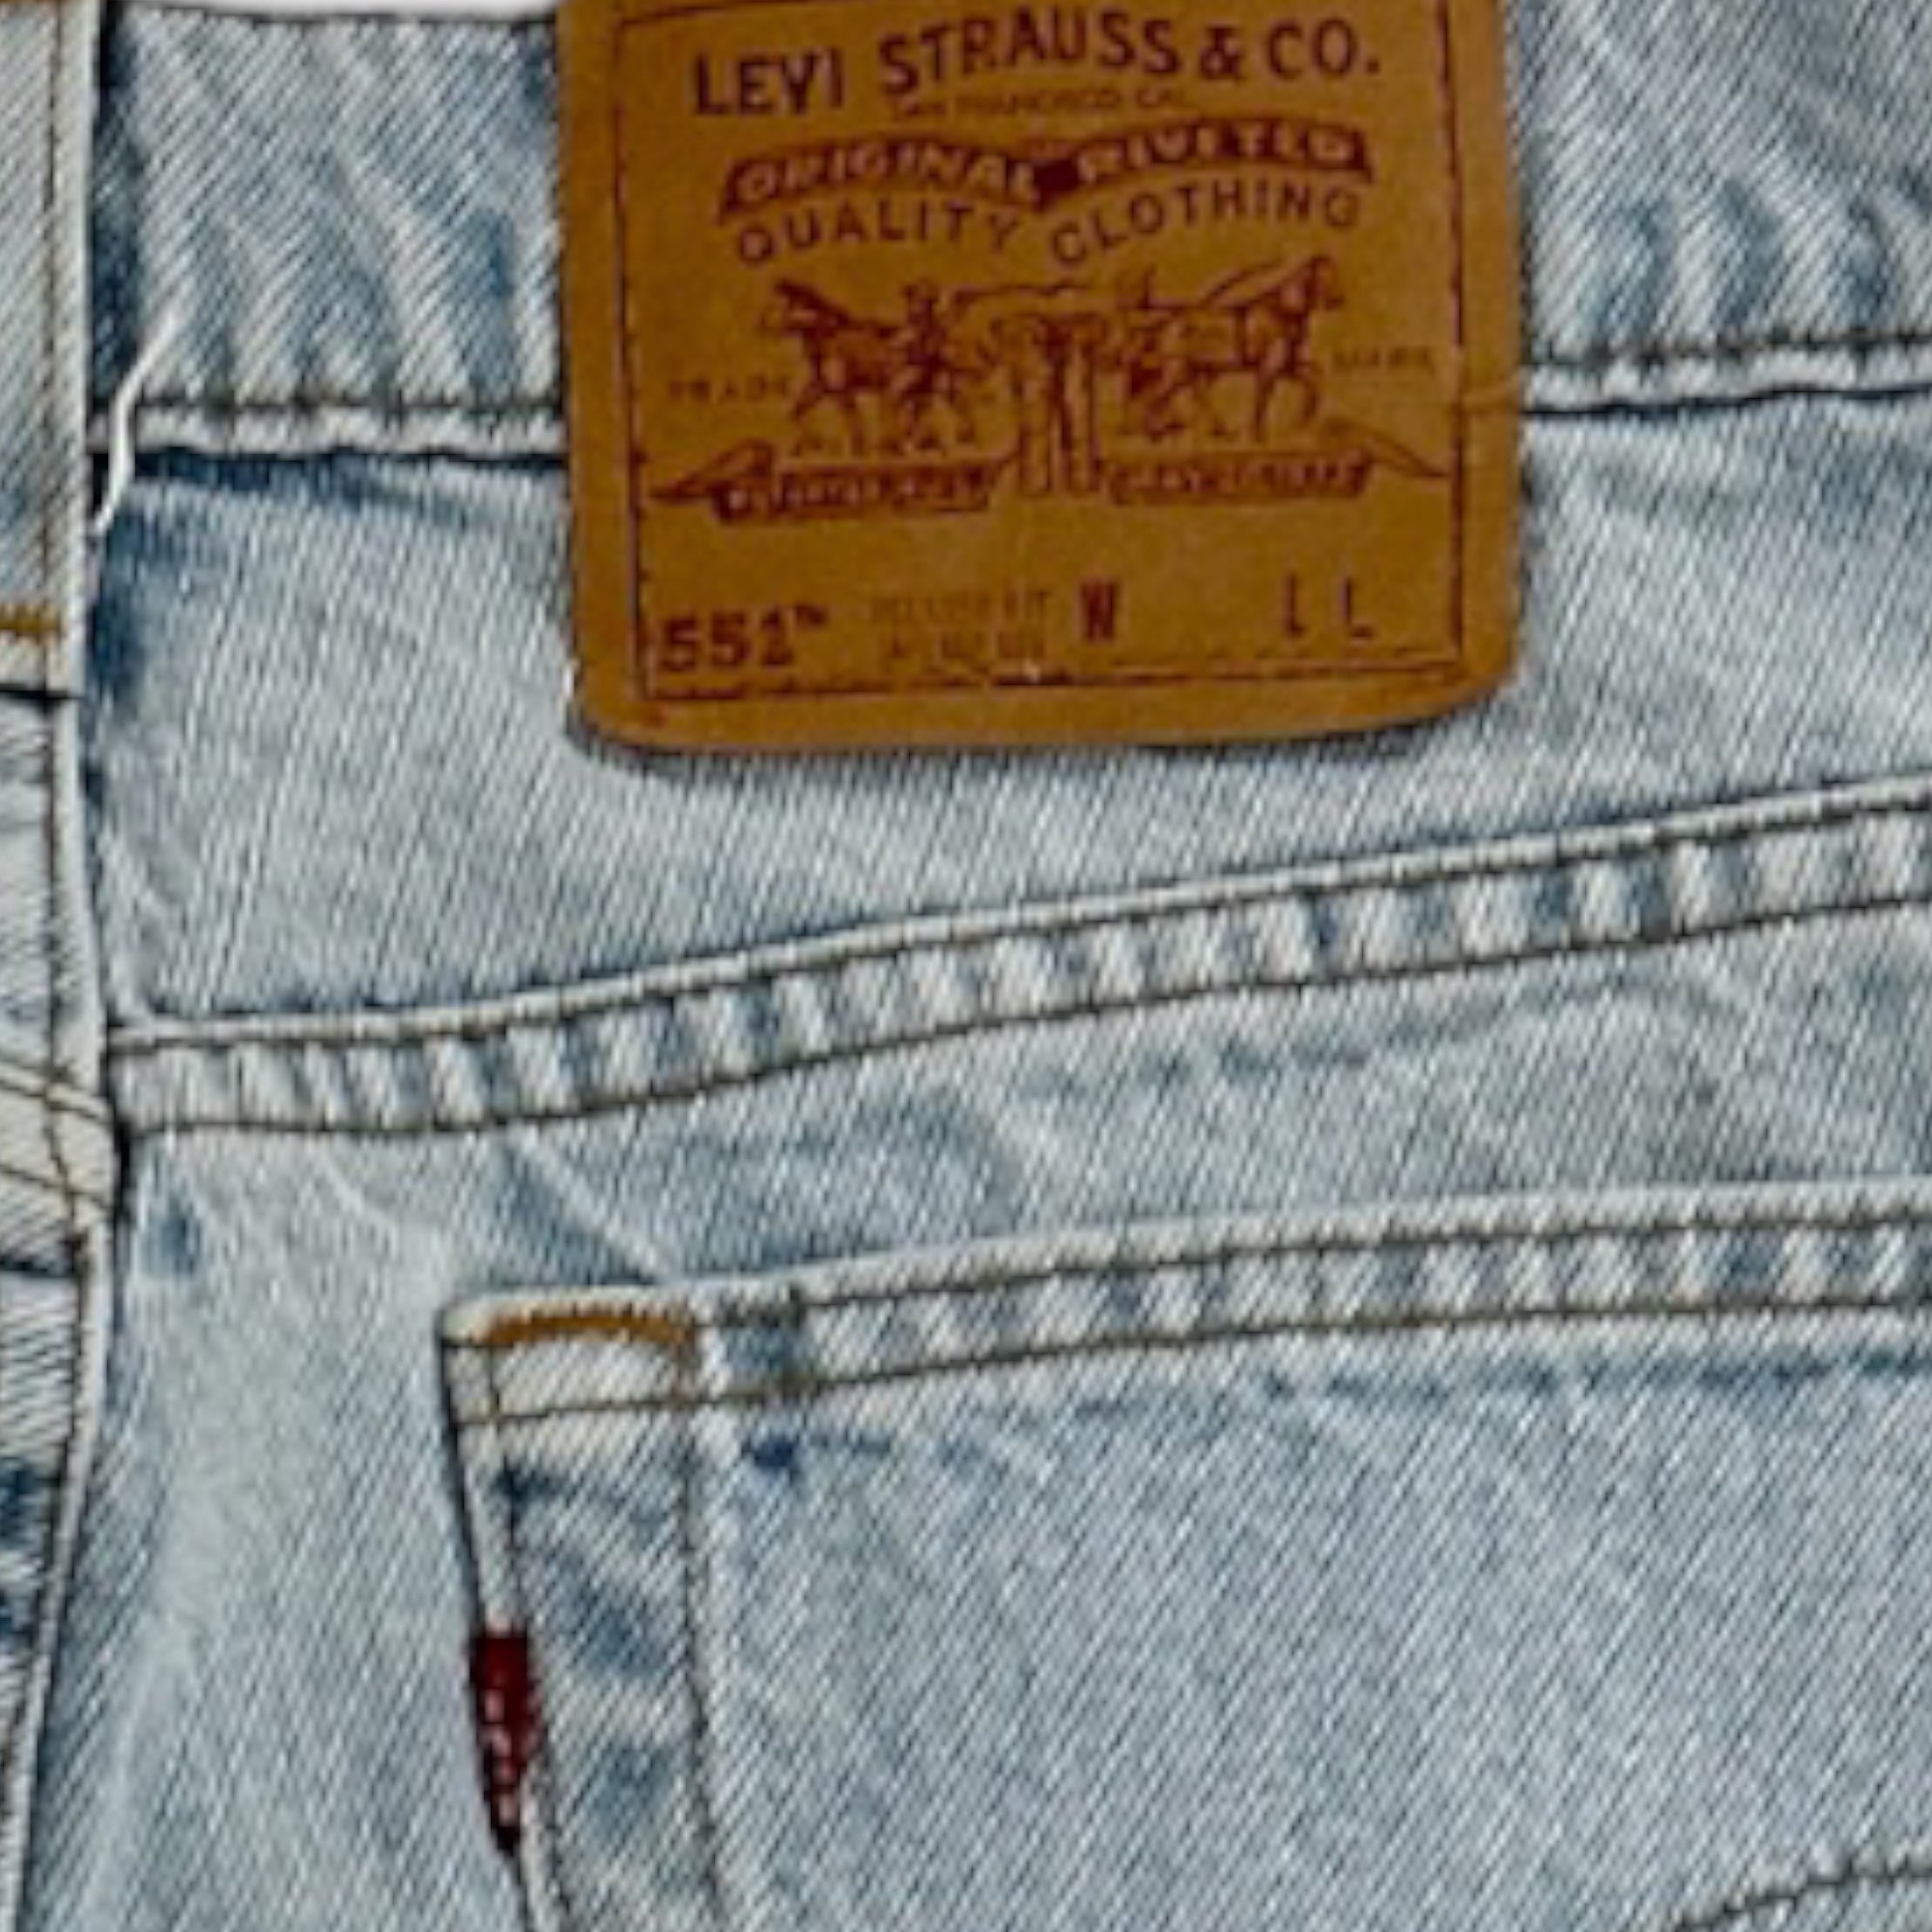 Vintage Levi's 551 Relaxed Fit Jeans - USA 1996 - 32 Waist Great Lakes Reclaimed Denim